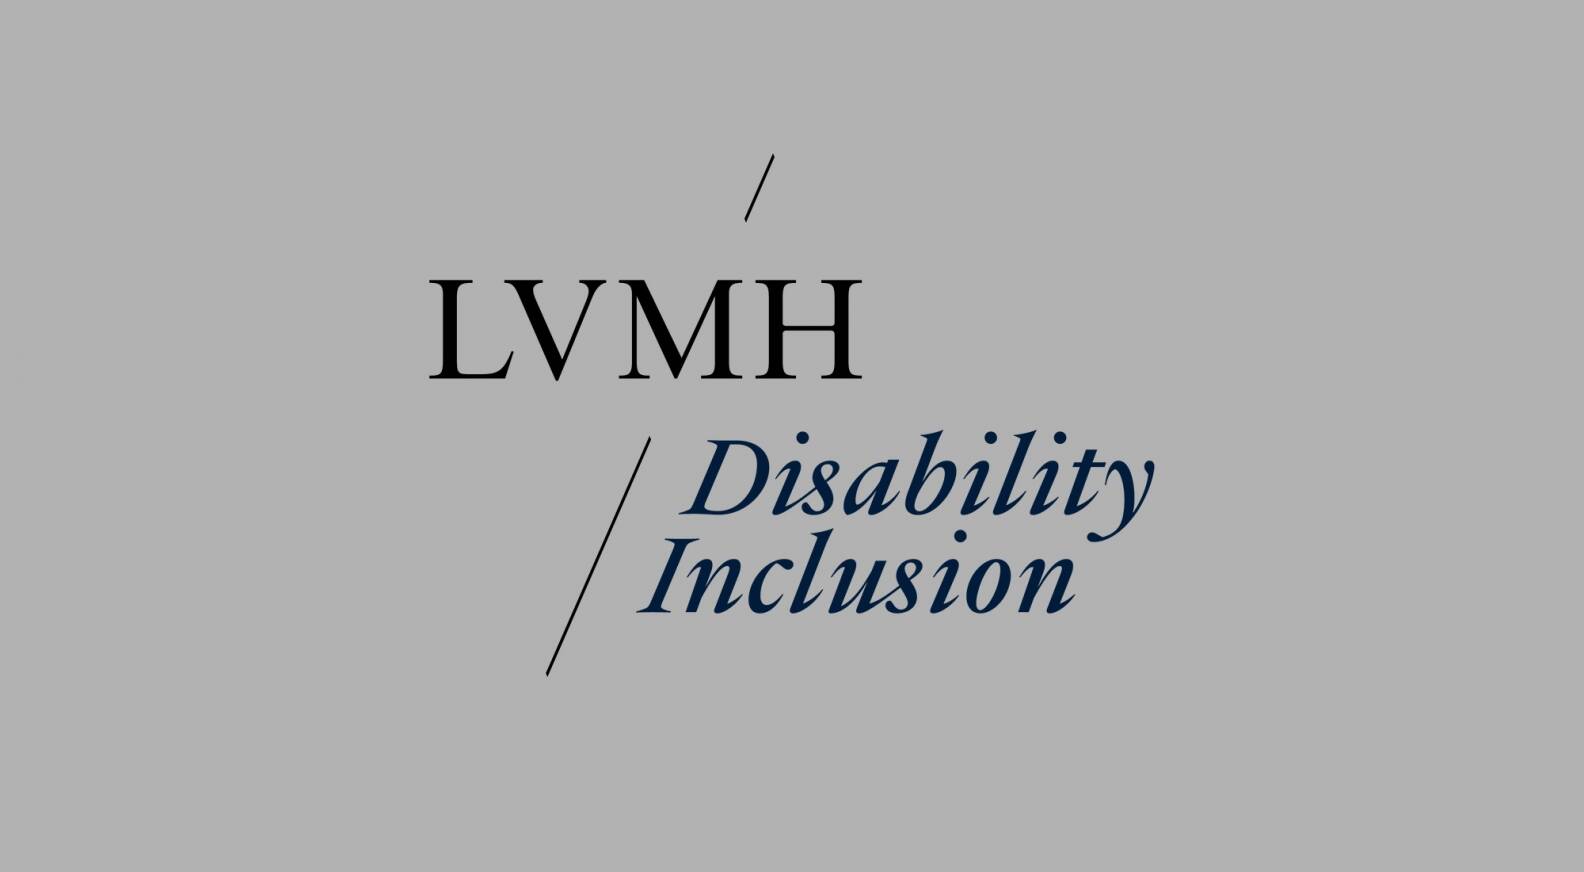 LVMH strengthens its commitment to building an inclusive company culture by  signing the UN standards of conduct for business, which fight against  discrimination towards LGBTI people - LVMH